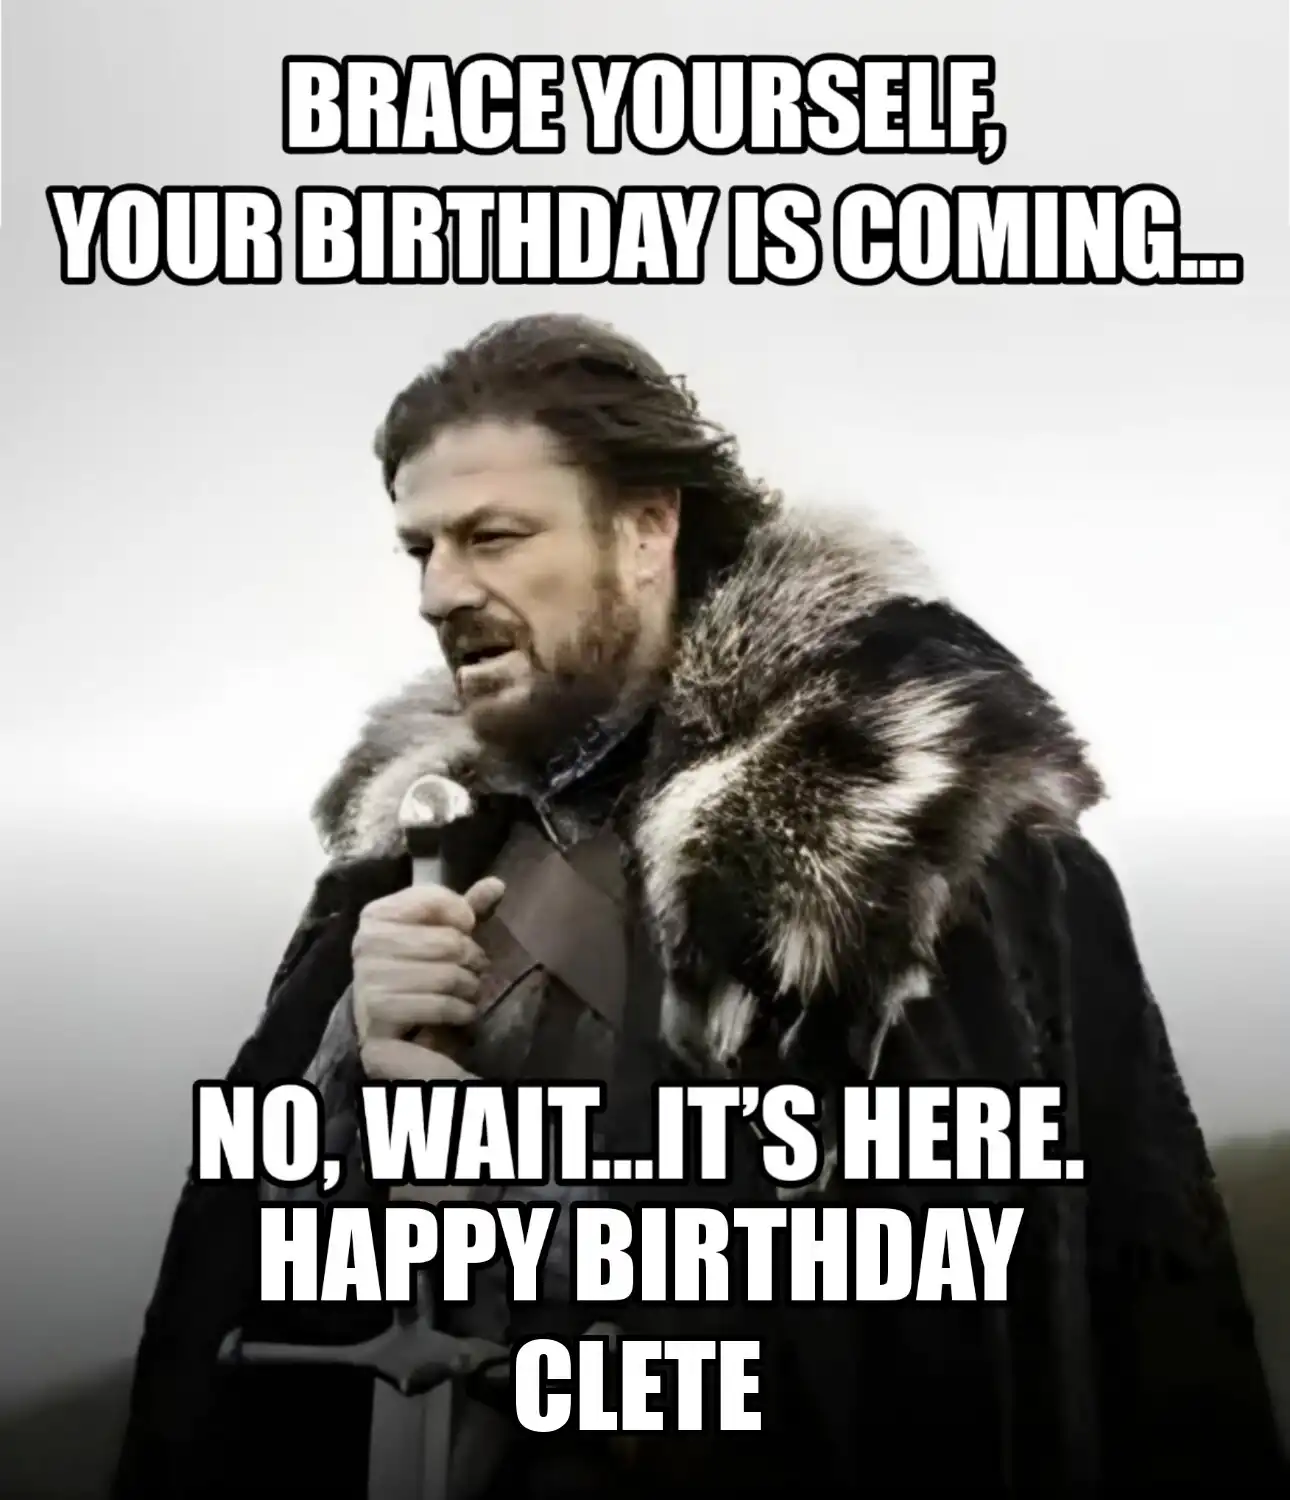 Happy Birthday Clete Brace Yourself Your Birthday Is Coming Meme